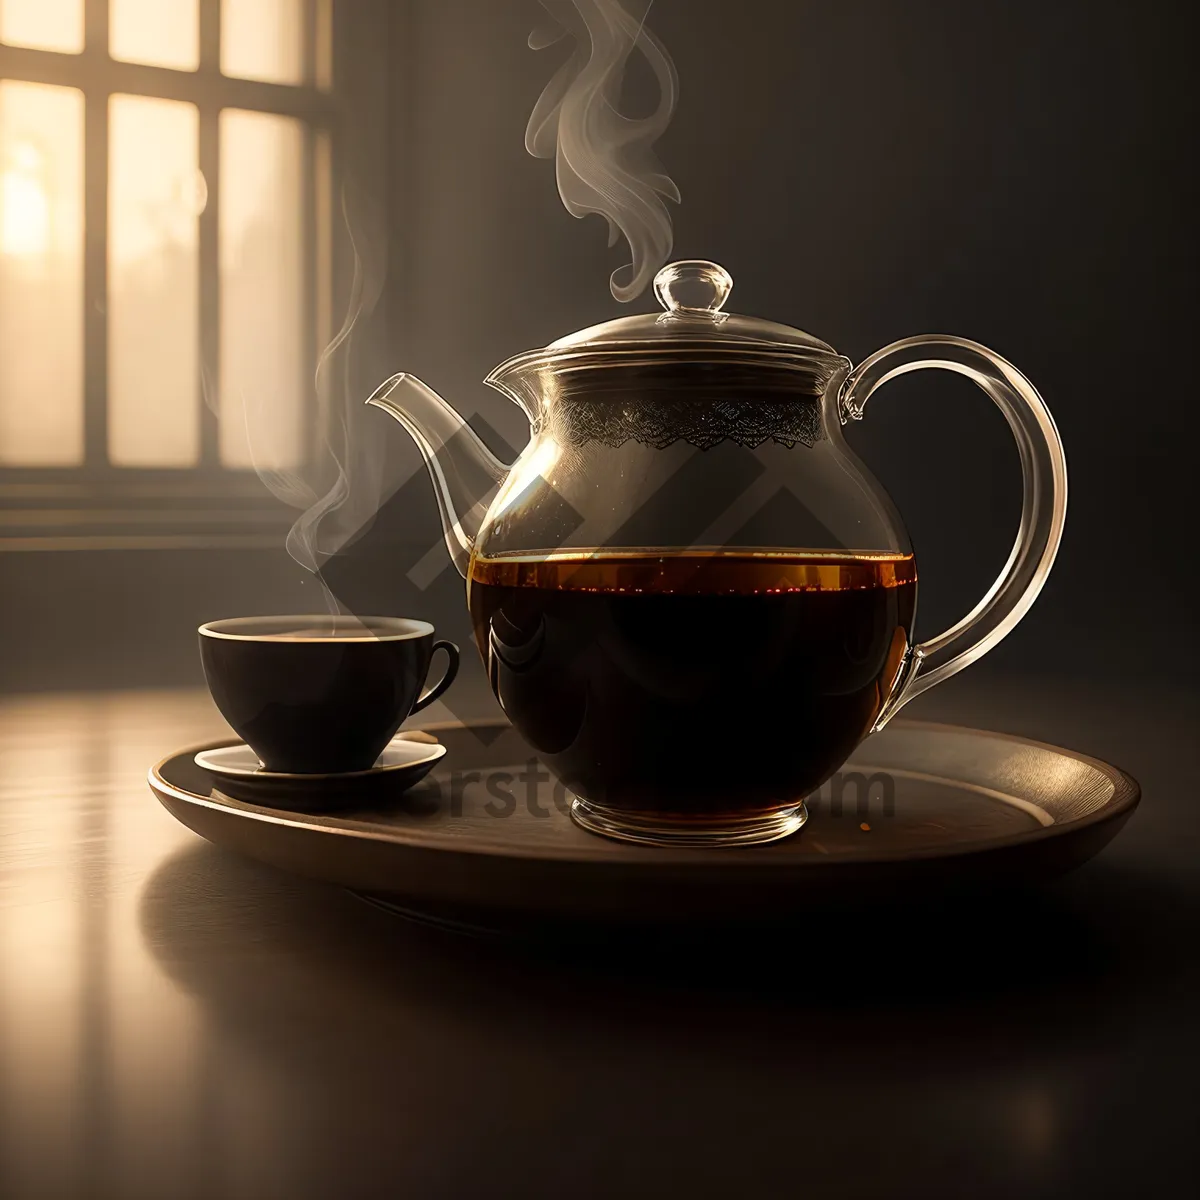 Picture of Hot morning beverage in elegant china teapot